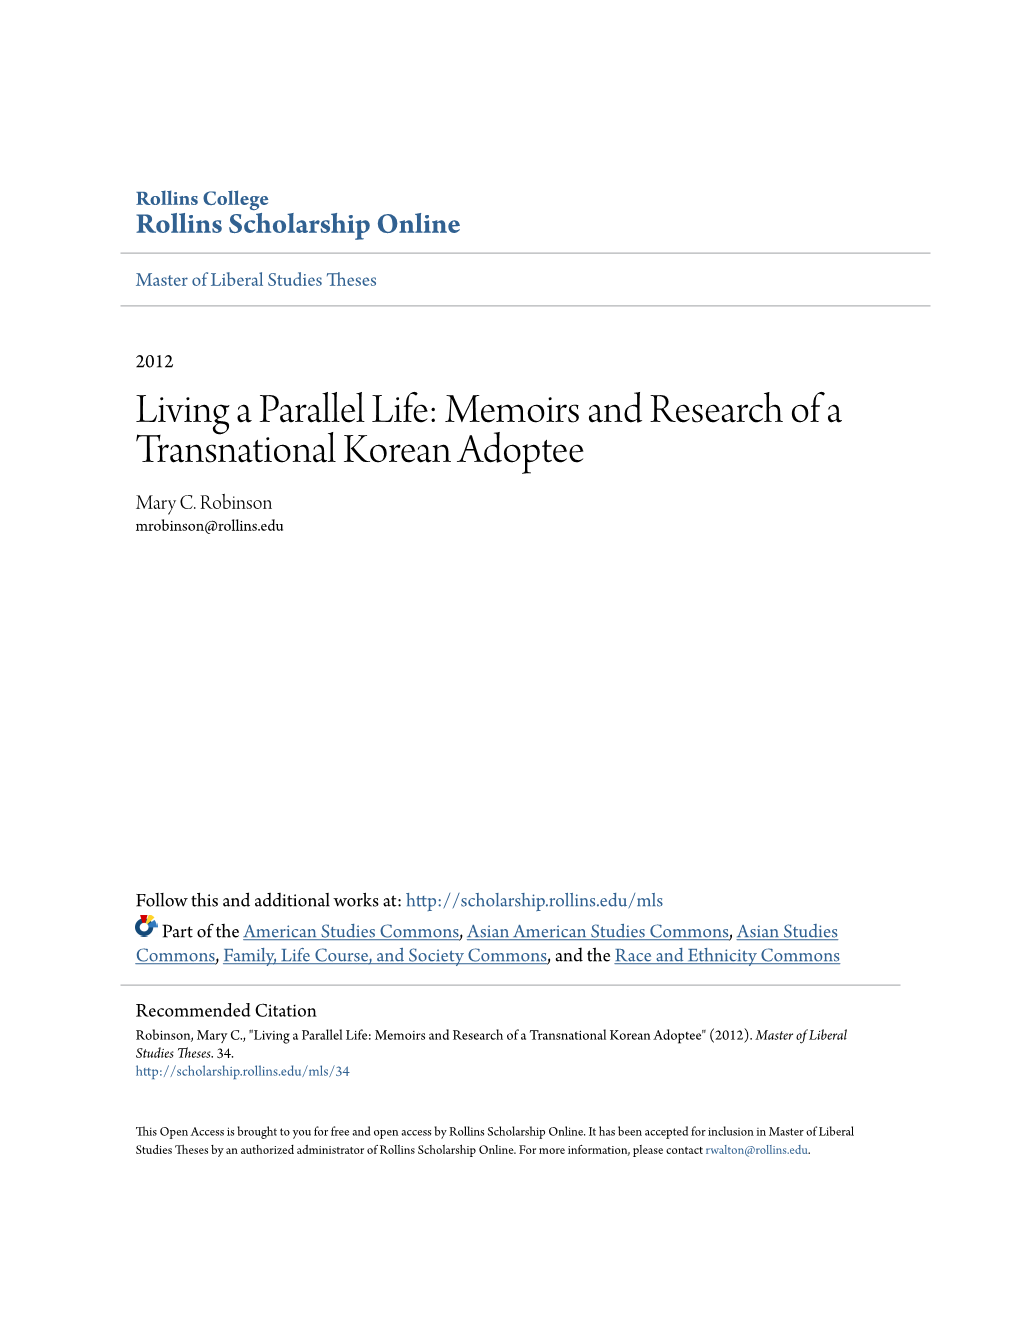 Memoirs and Research of a Transnational Korean Adoptee Mary C